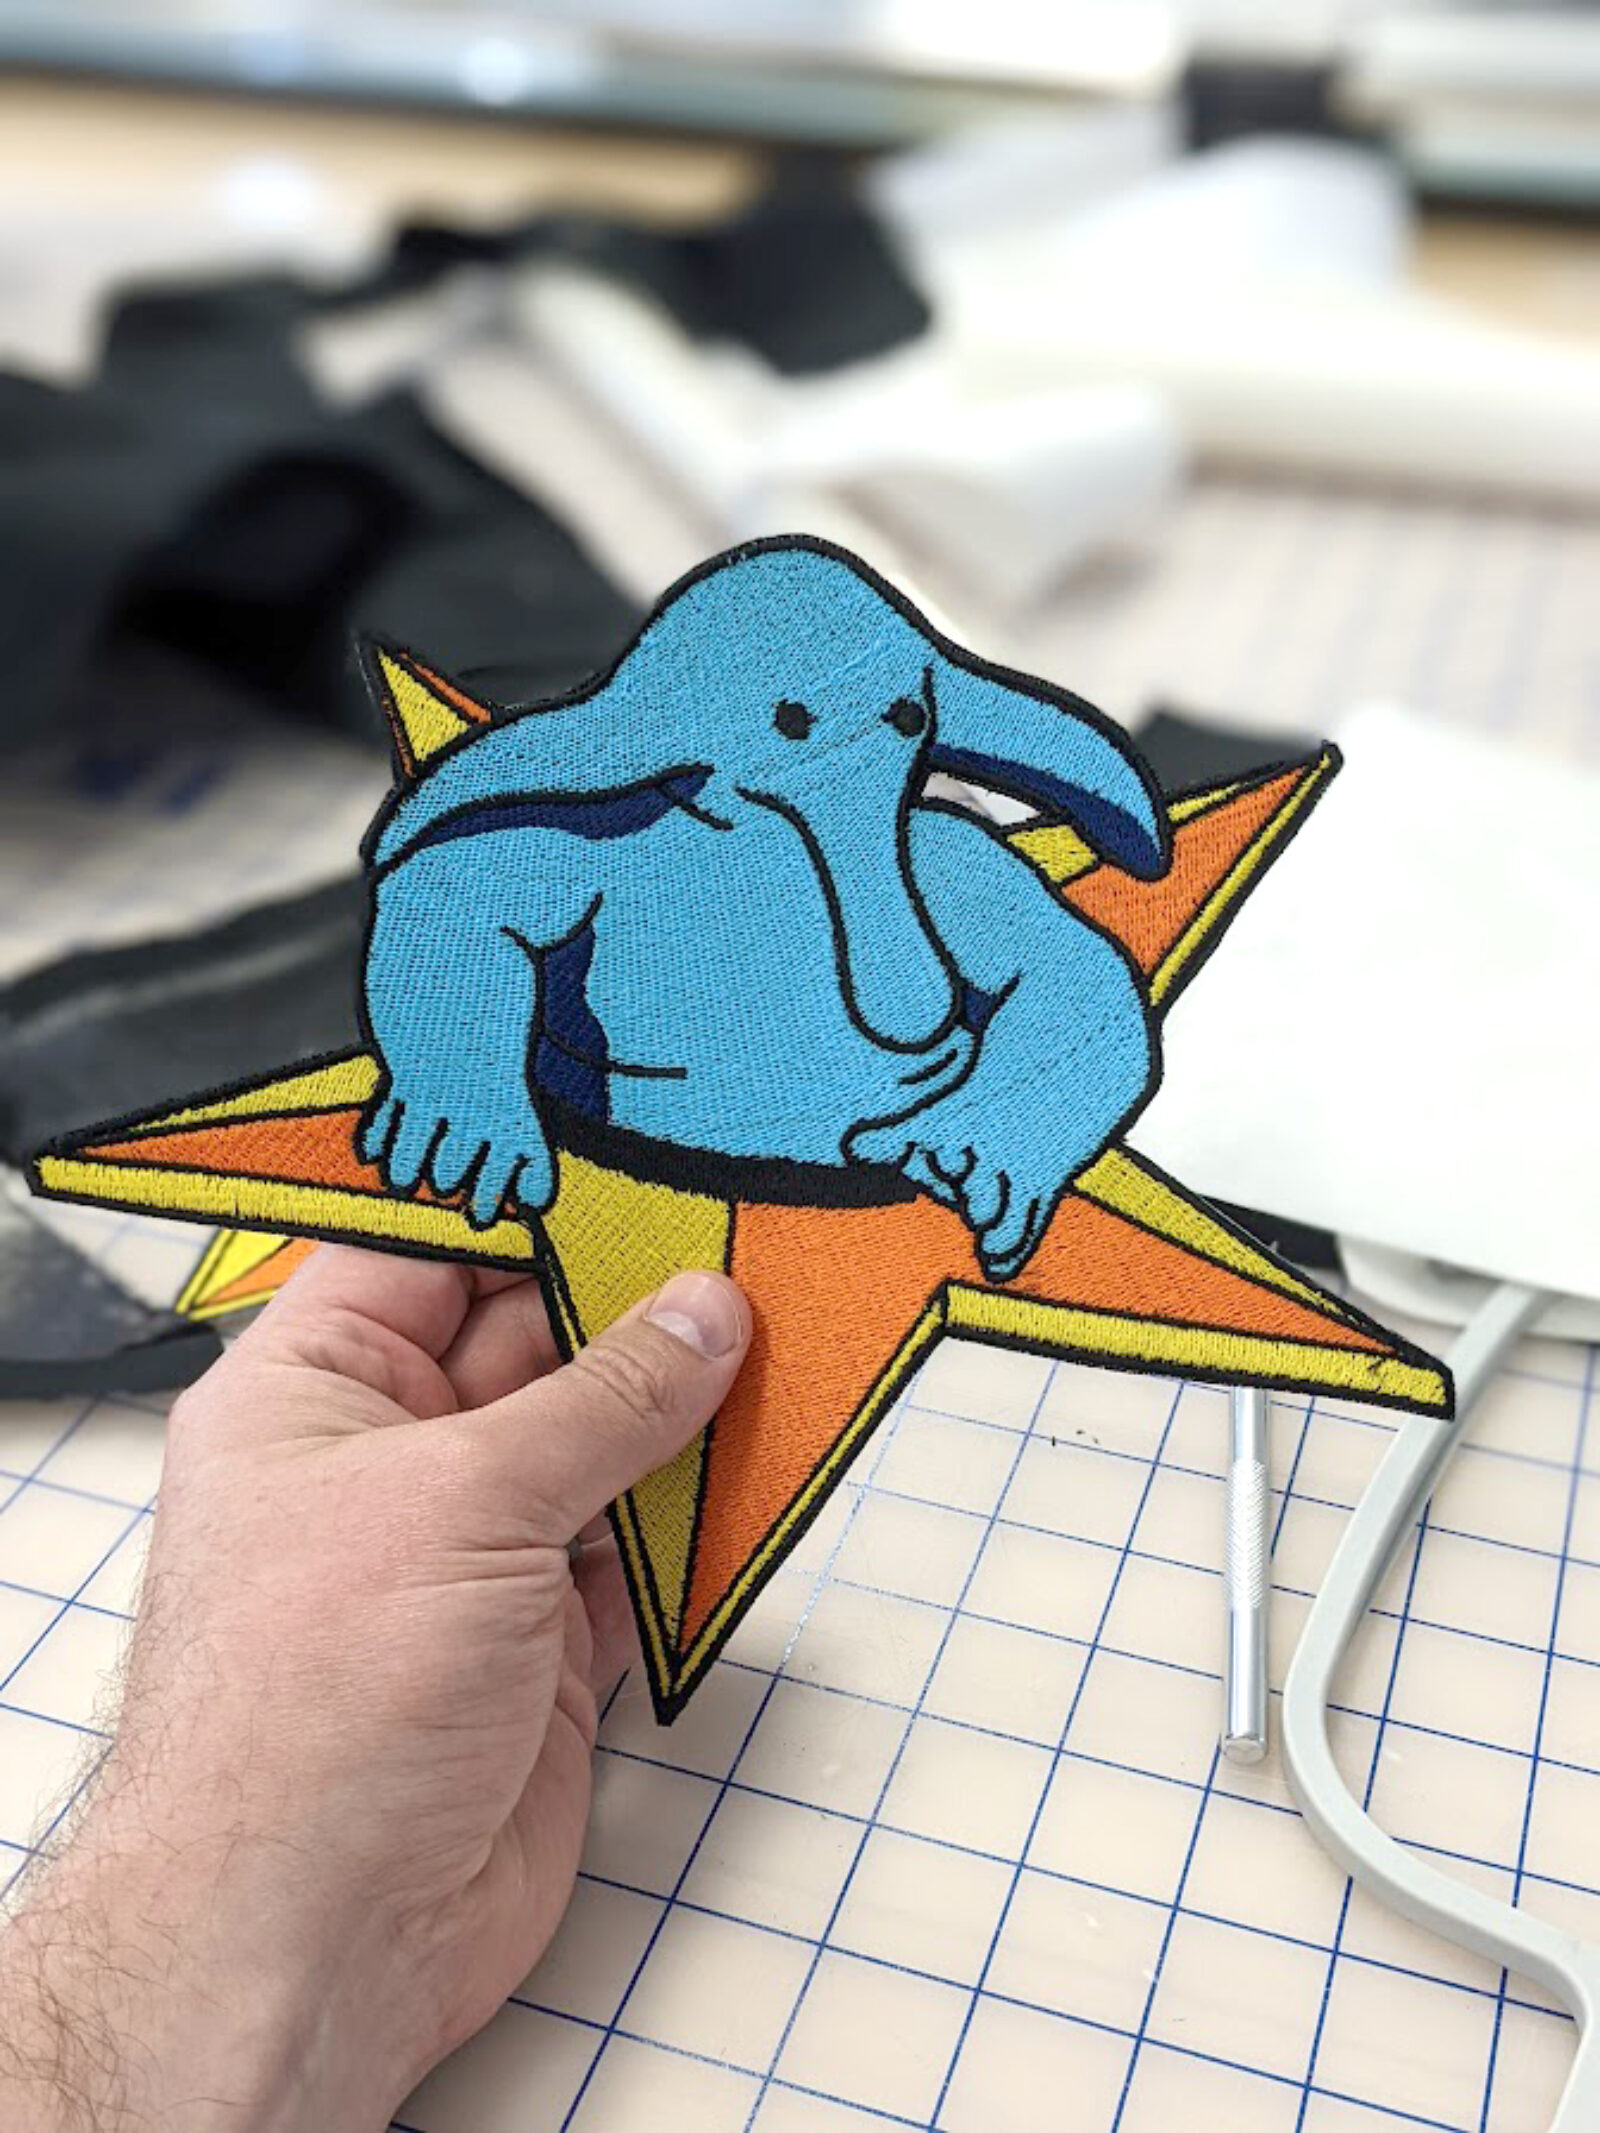 finished patch featuring max rebo from star wars